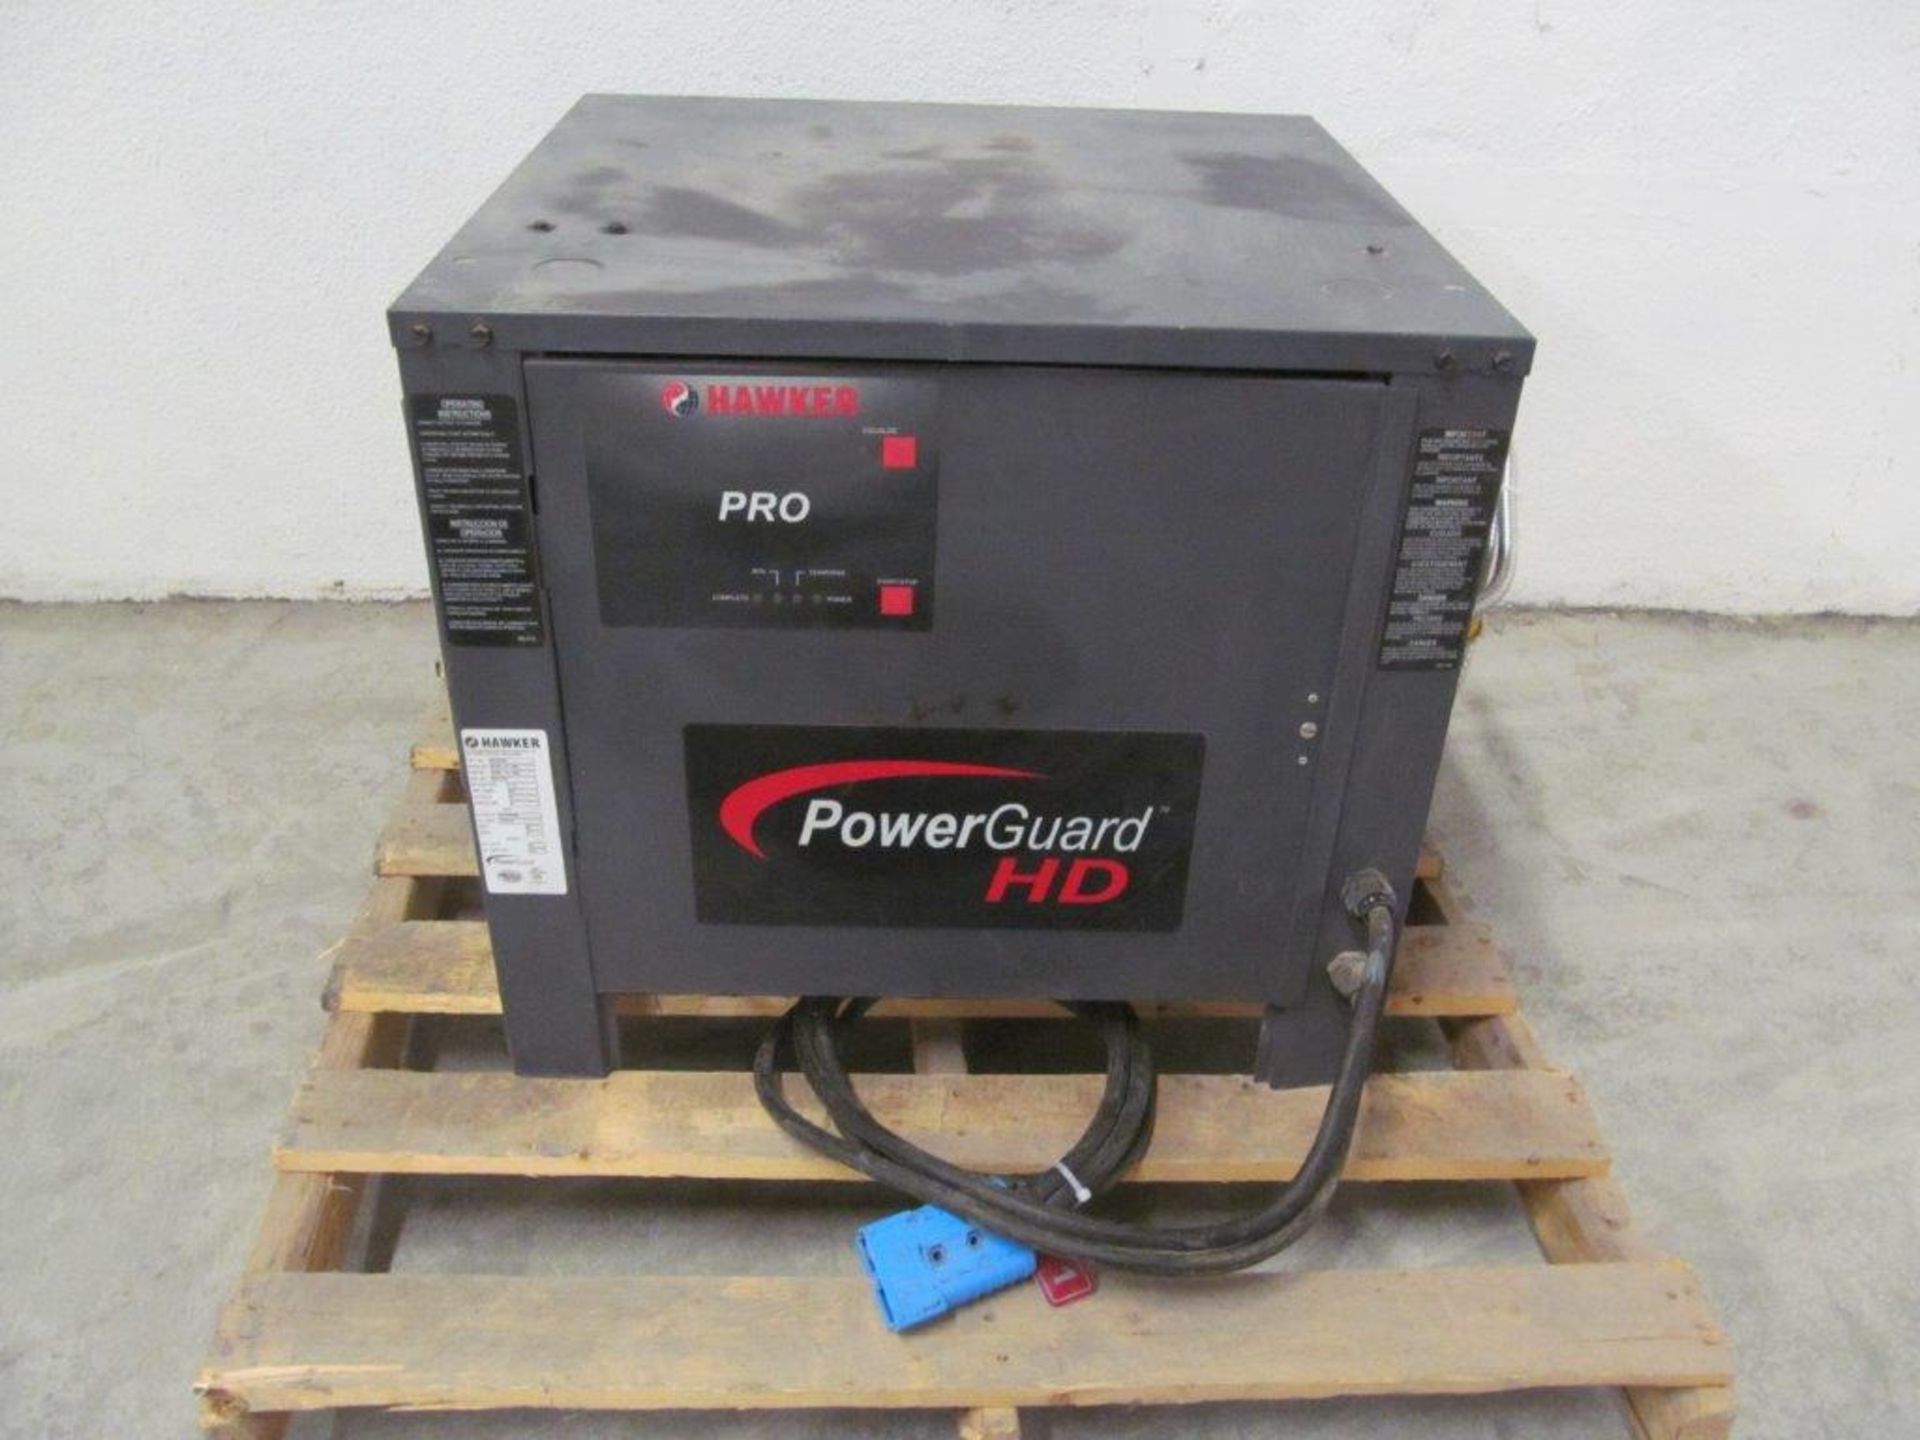 HAWKER POWER GUARD 48 VOLT BATTERY CHARGER, MODEL PH3I-24-680 - Image 2 of 3